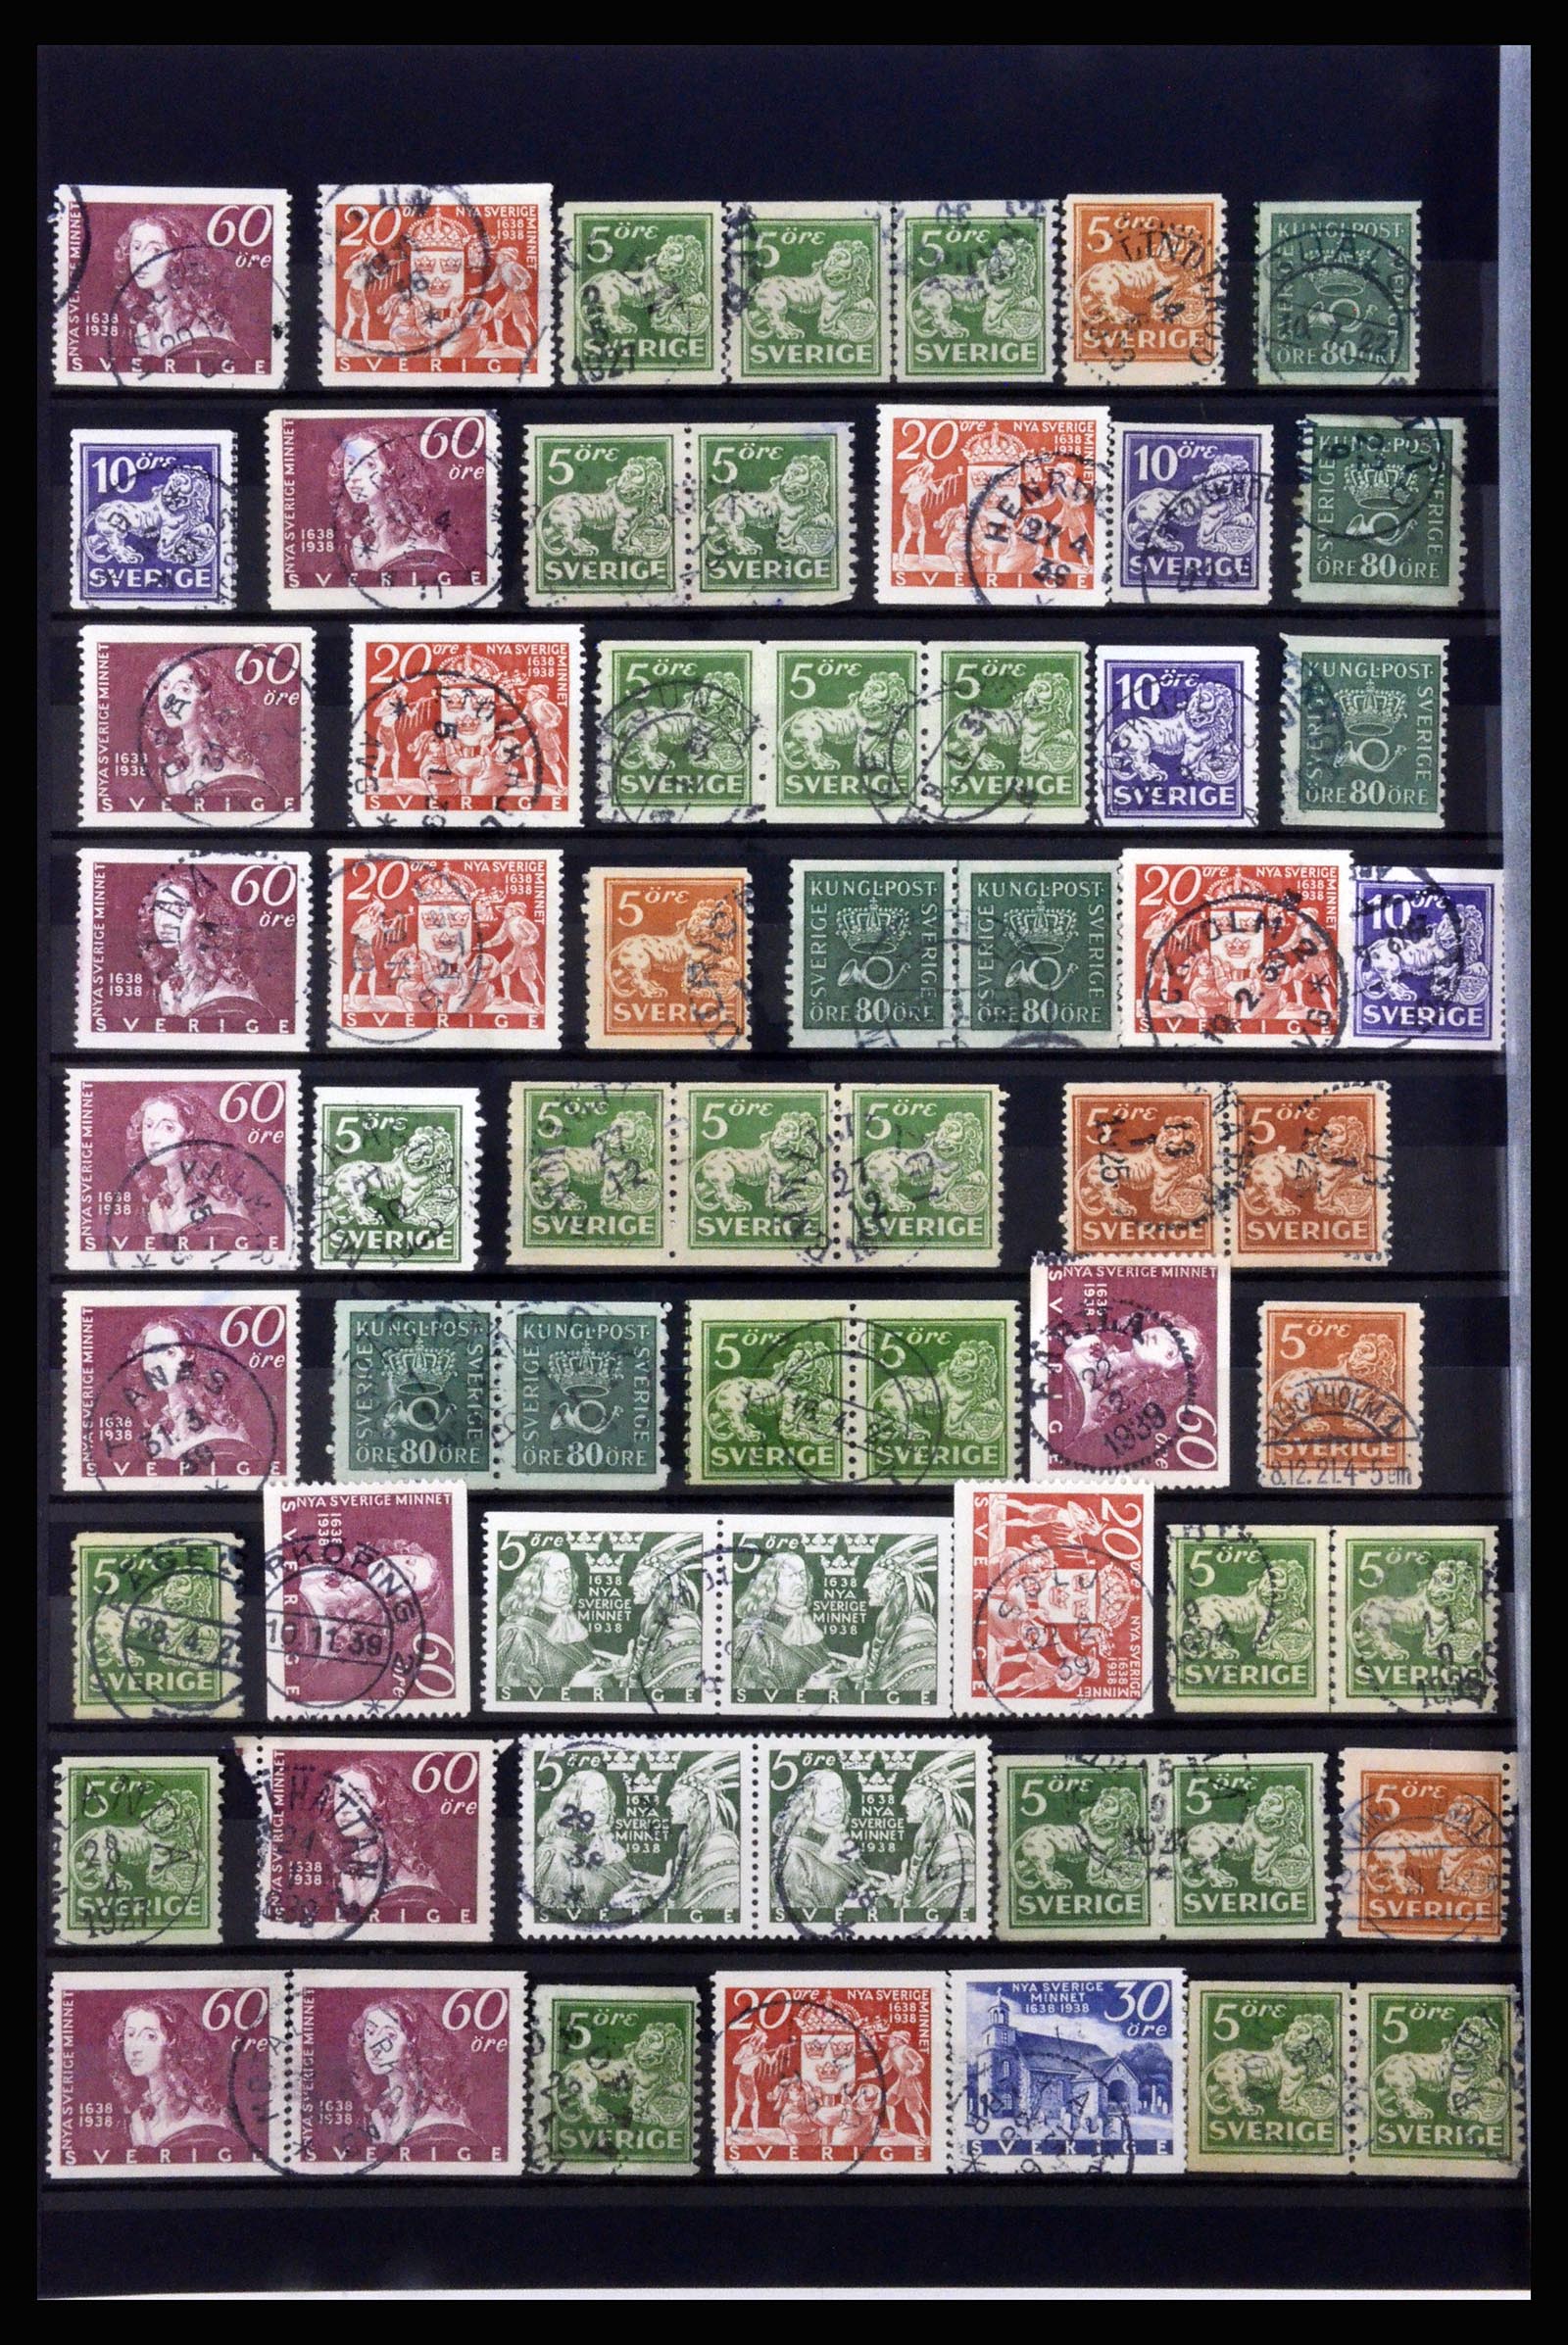 36316 034 - Stamp collection 36316 Sweden cancellations 1920-1938.